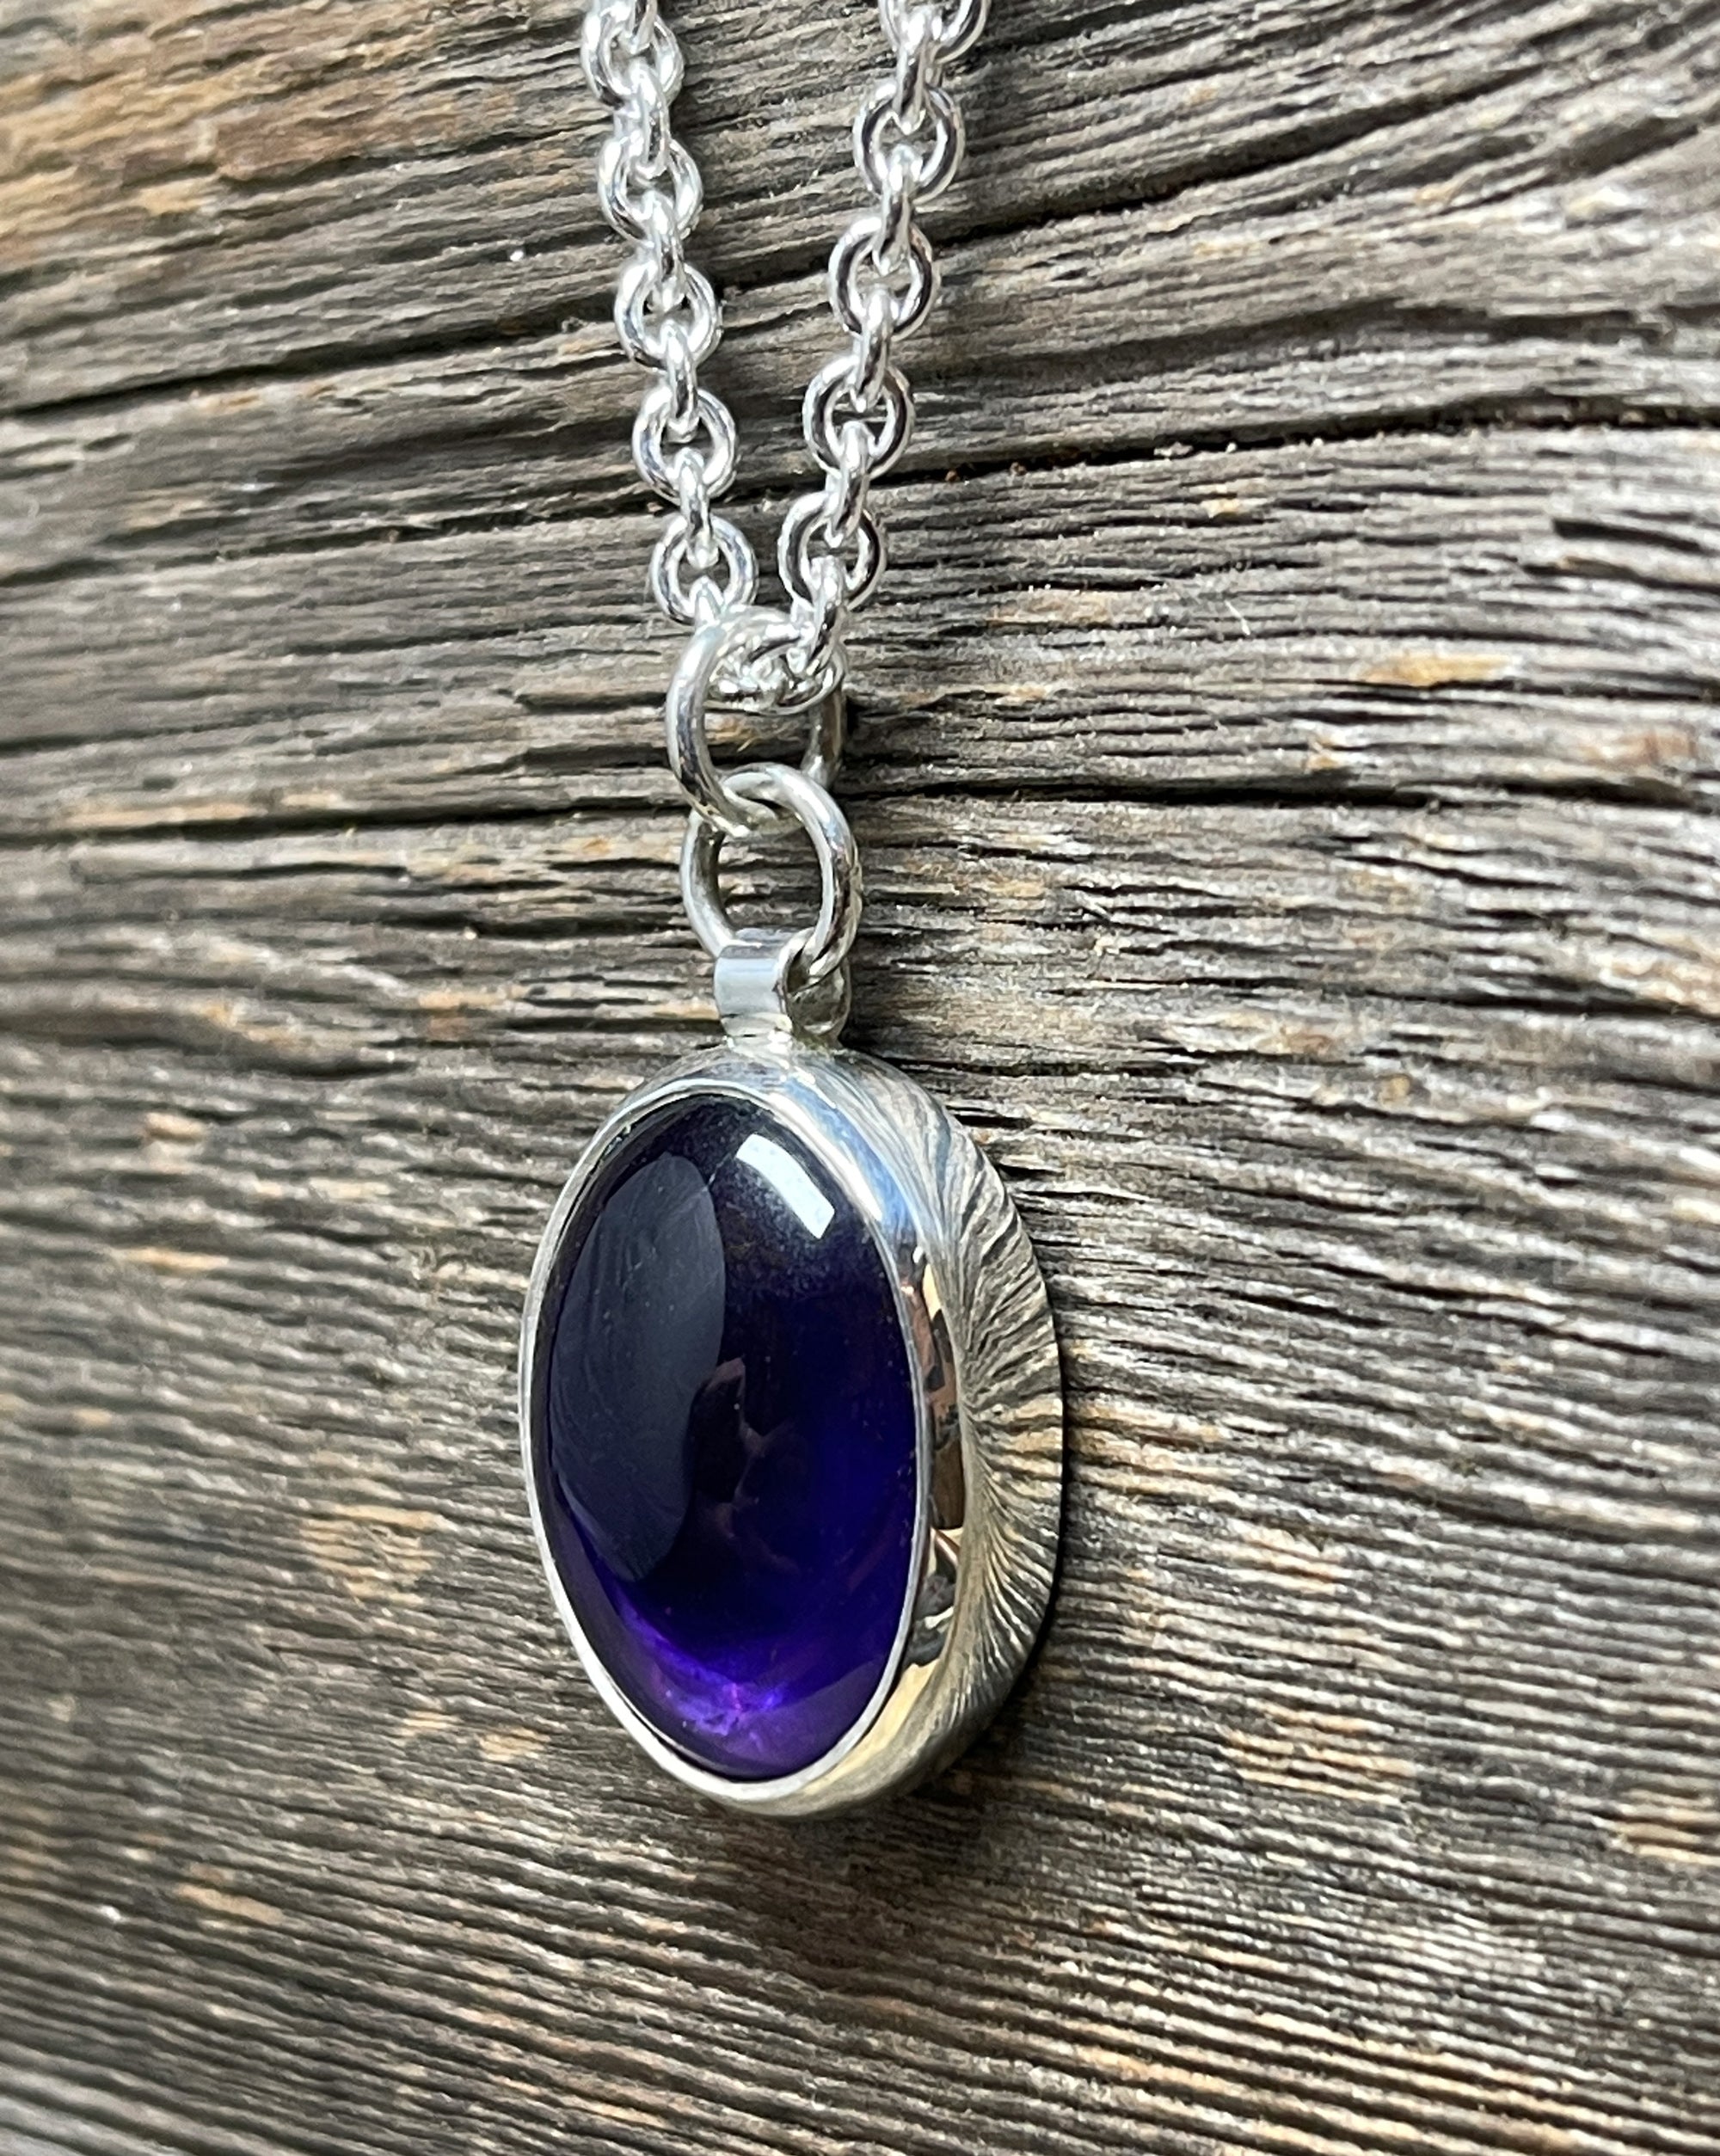 Amethyst Necklace in Sterling Silver, Amethyst Layering Necklace, Large Amethyst, Amethyst Pendant, February Birthstone, Gift for Her